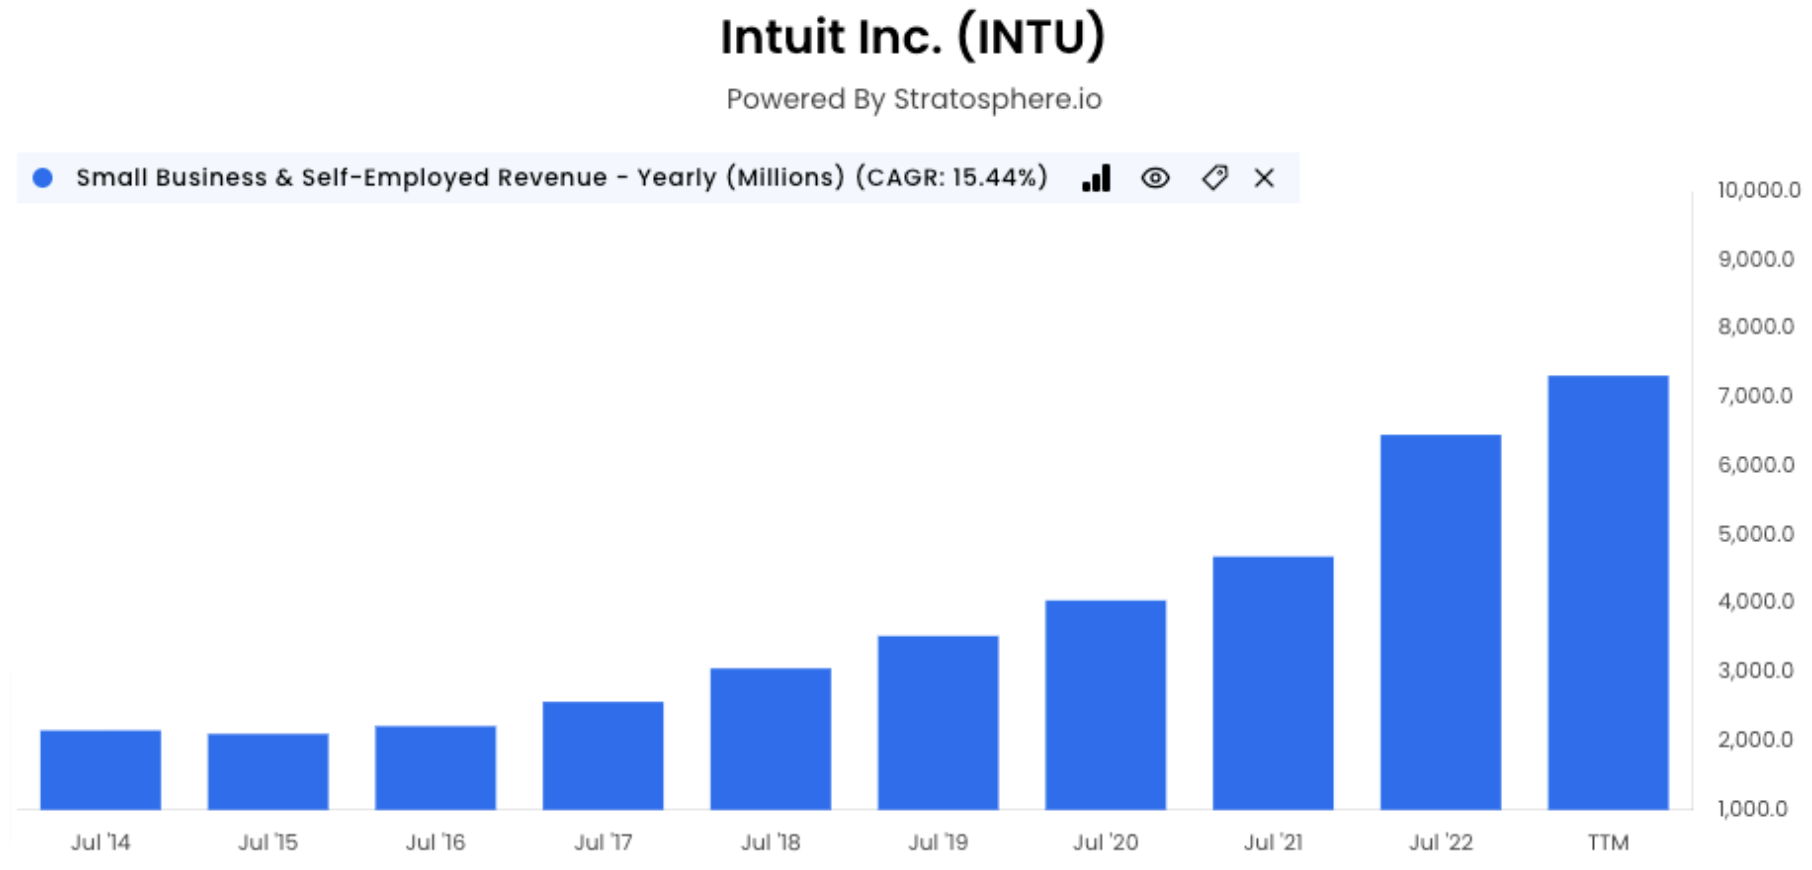 Intuit Inc. small business and self-employed revenue graph